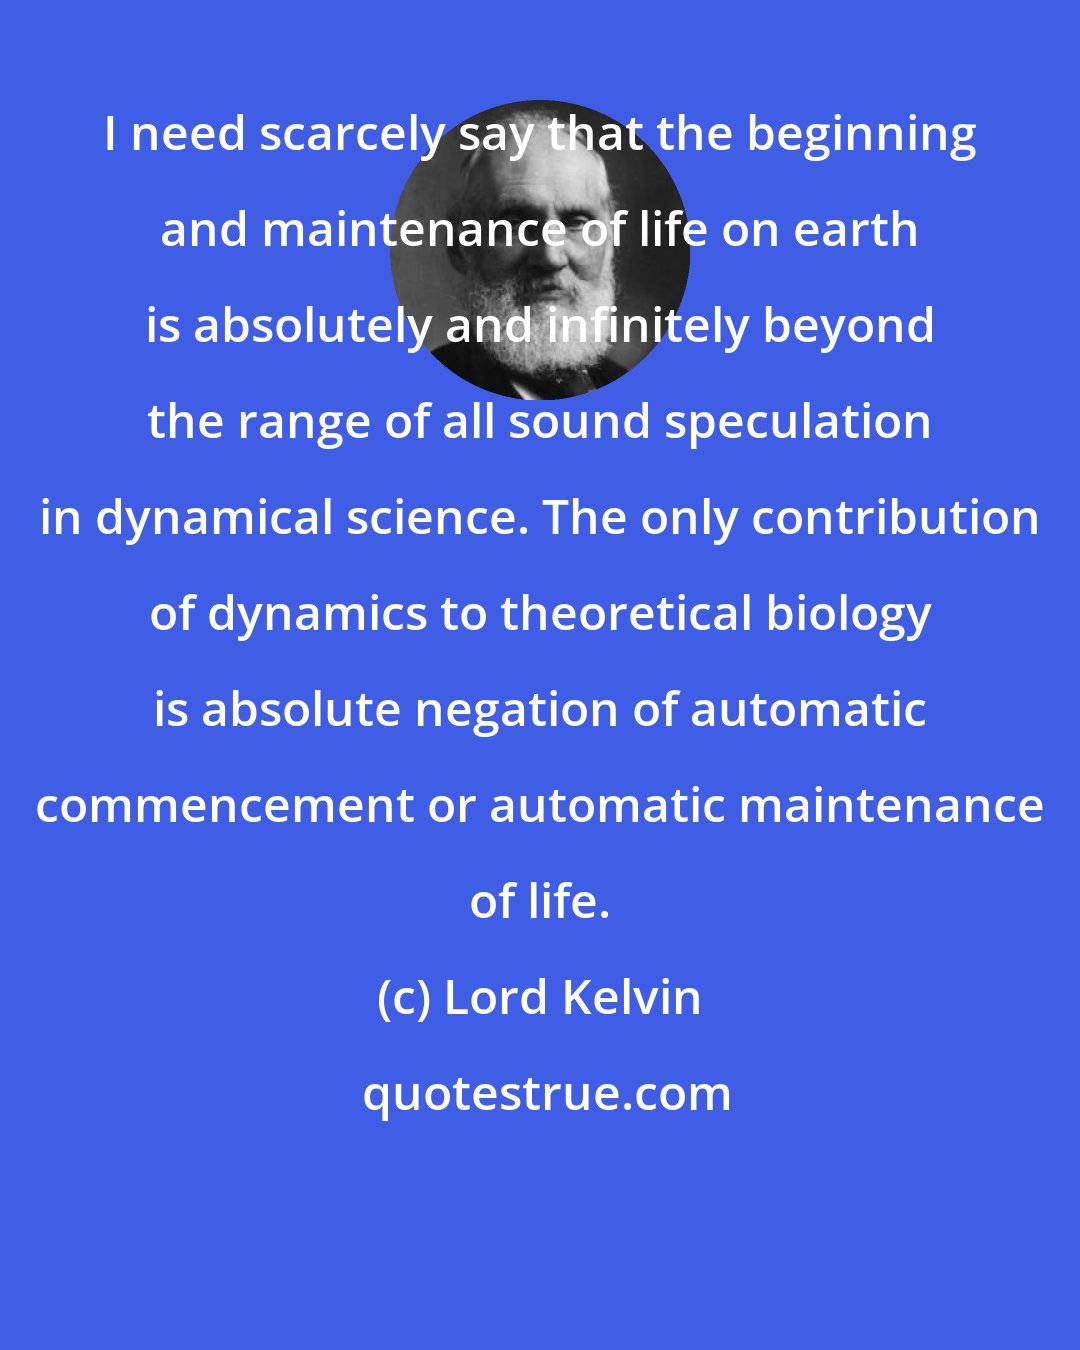 Lord Kelvin: I need scarcely say that the beginning and maintenance of life on earth is absolutely and infinitely beyond the range of all sound speculation in dynamical science. The only contribution of dynamics to theoretical biology is absolute negation of automatic commencement or automatic maintenance of life.